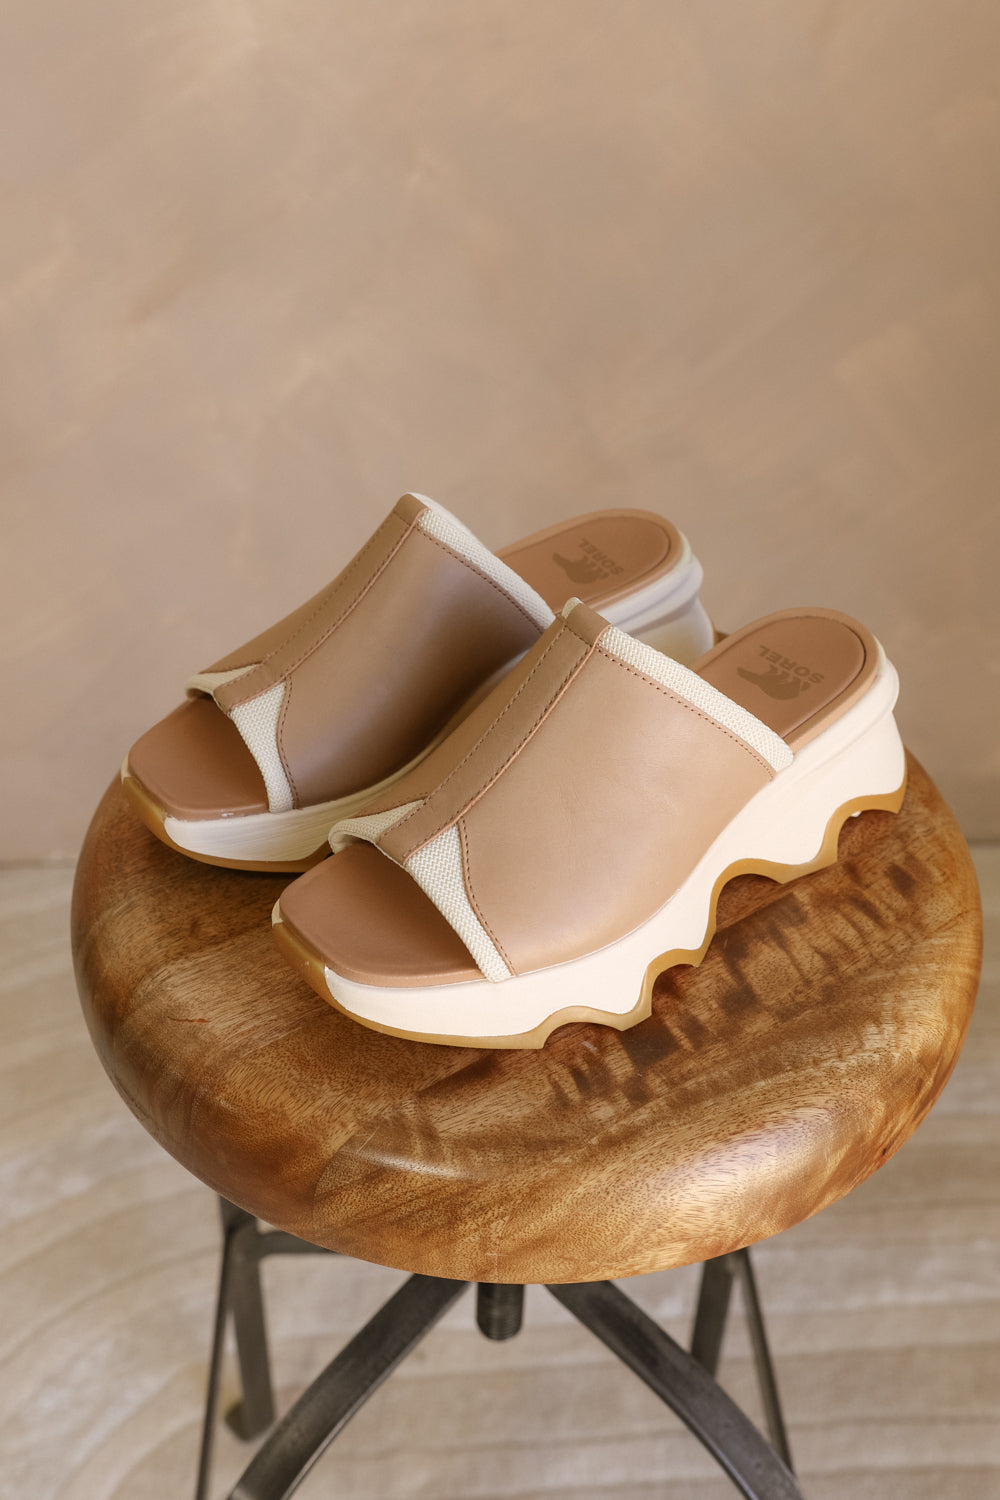 Side view of the Kinetic Impact Slide High Wedge Sandal in Honest Beige & Honest White which features Sporty Slip-On Style, Beige and Cream Leather Upper, Two-Tone Scalloped Sole Detail, Molded Rubber Outsole, 2 1/4" Heel Height and 1 1/4" Platform Height